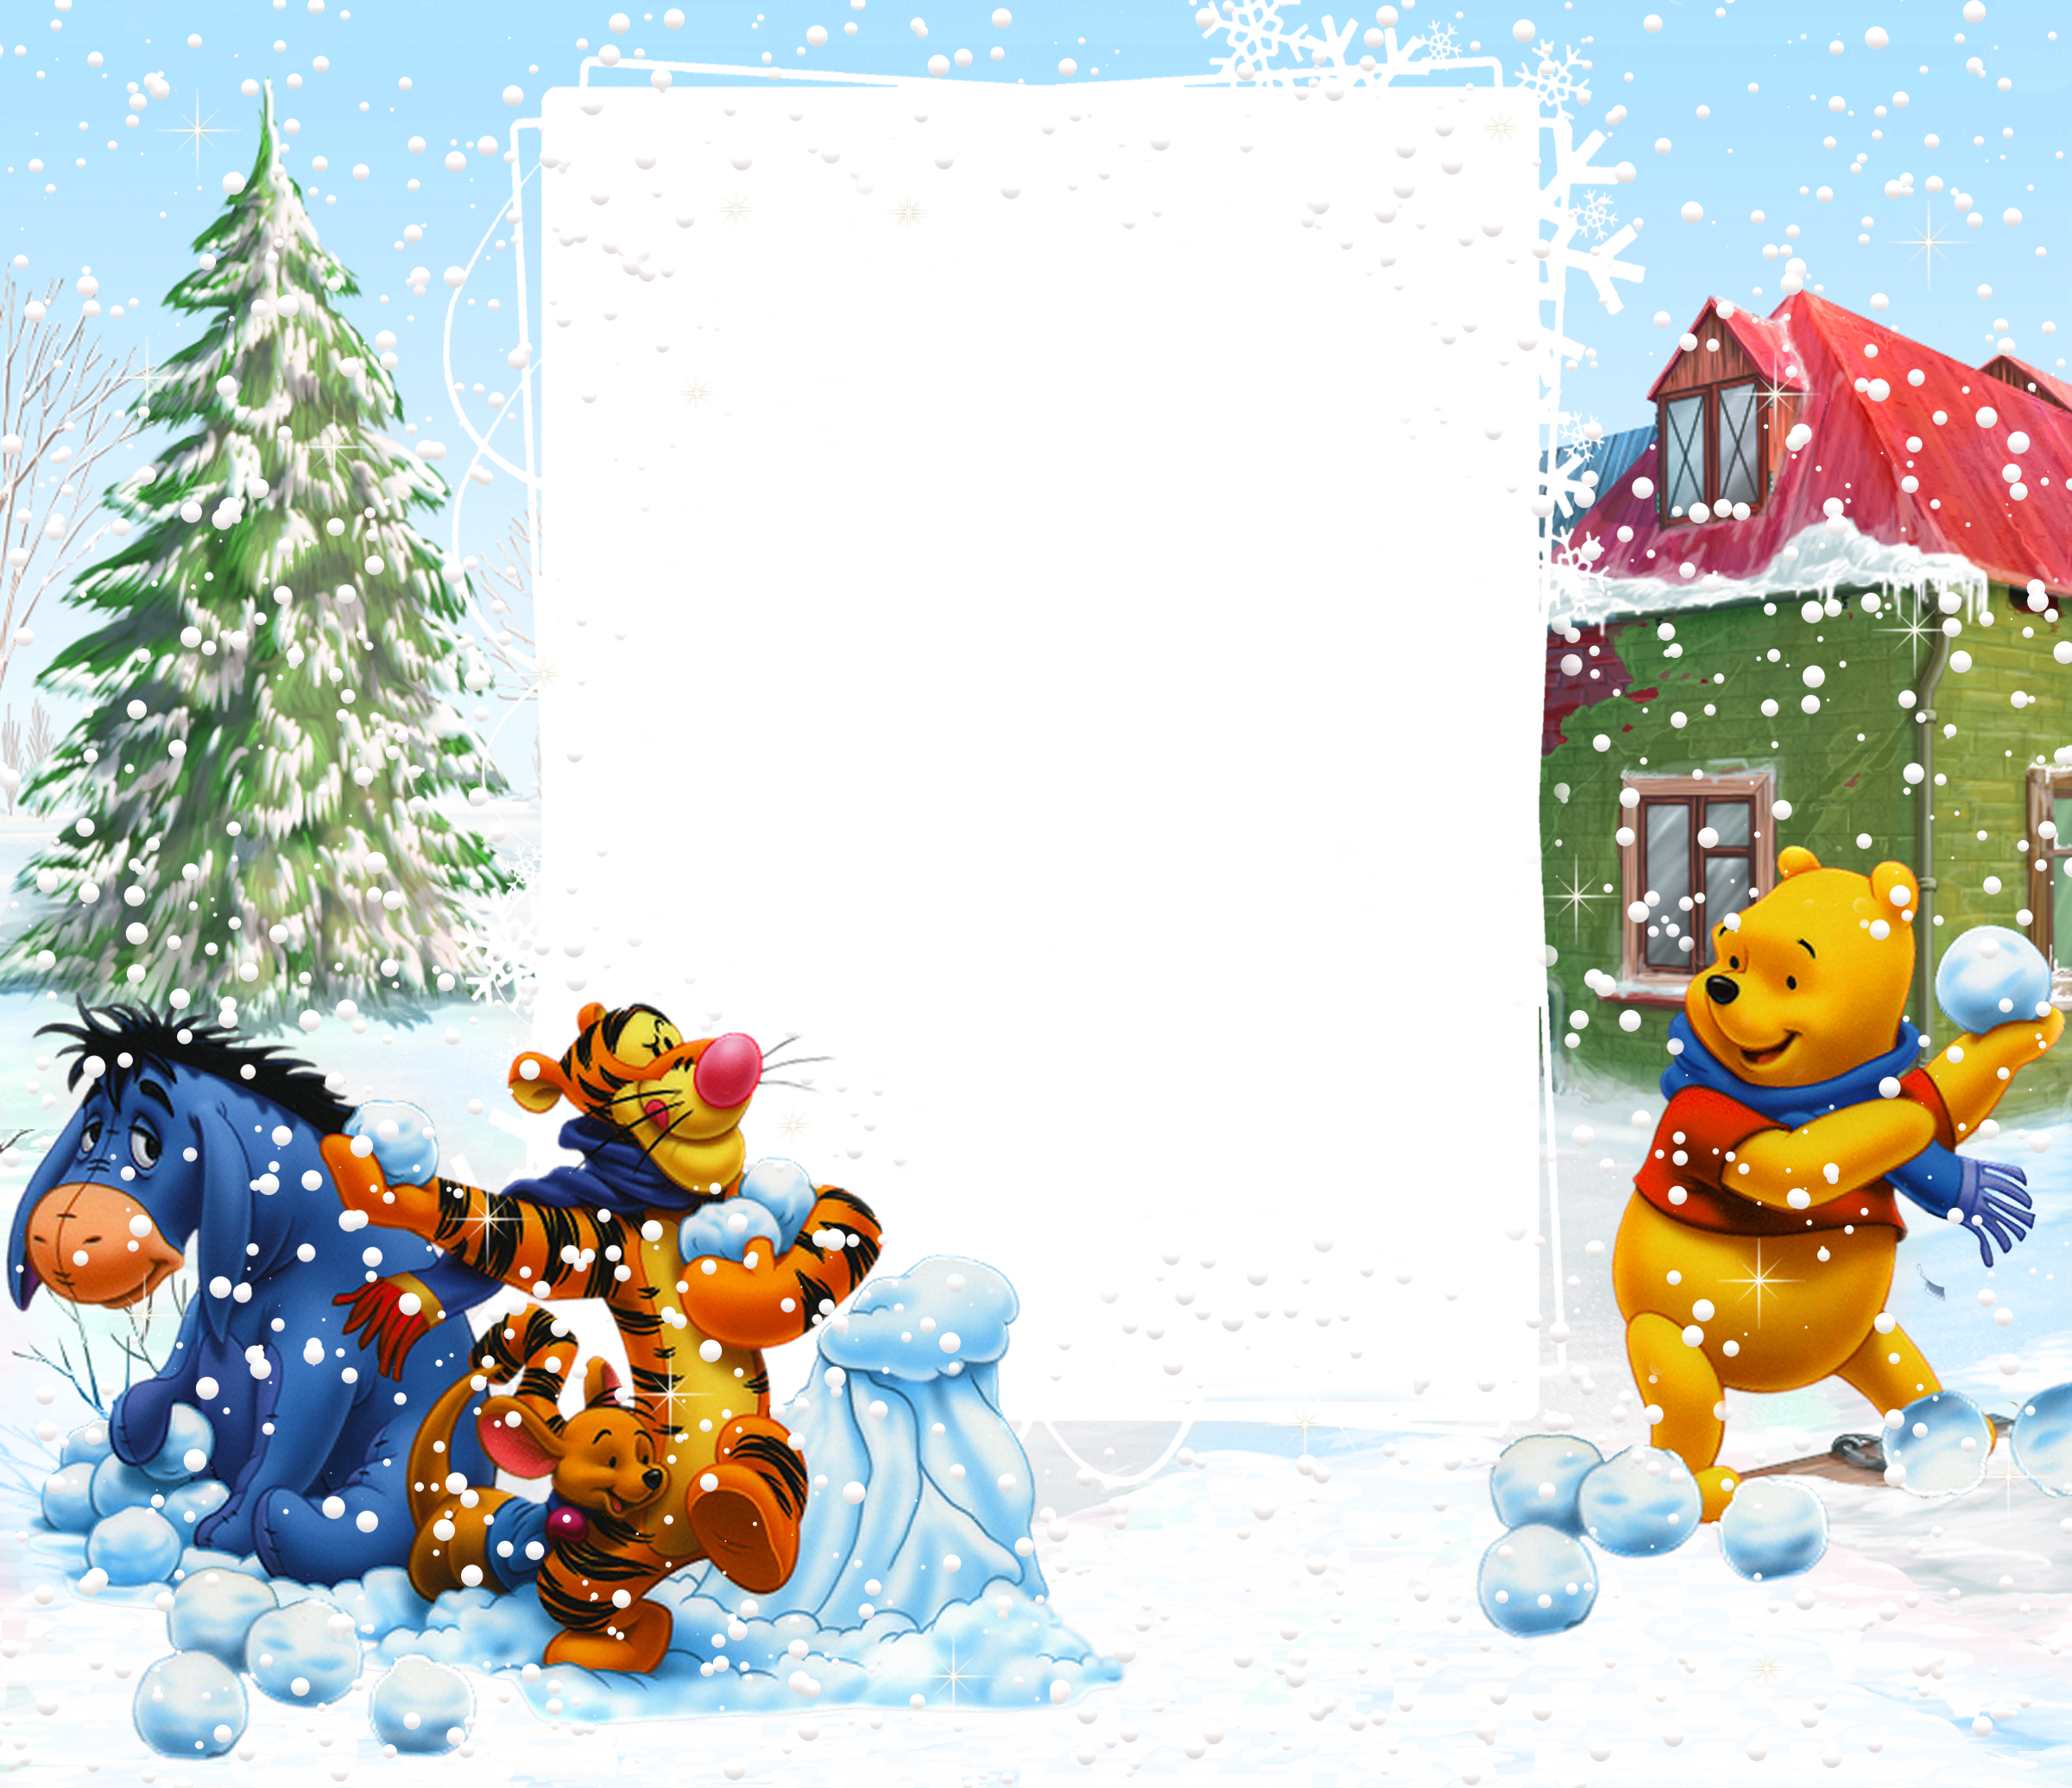 Winter clipart frame. Winnie the pooh png